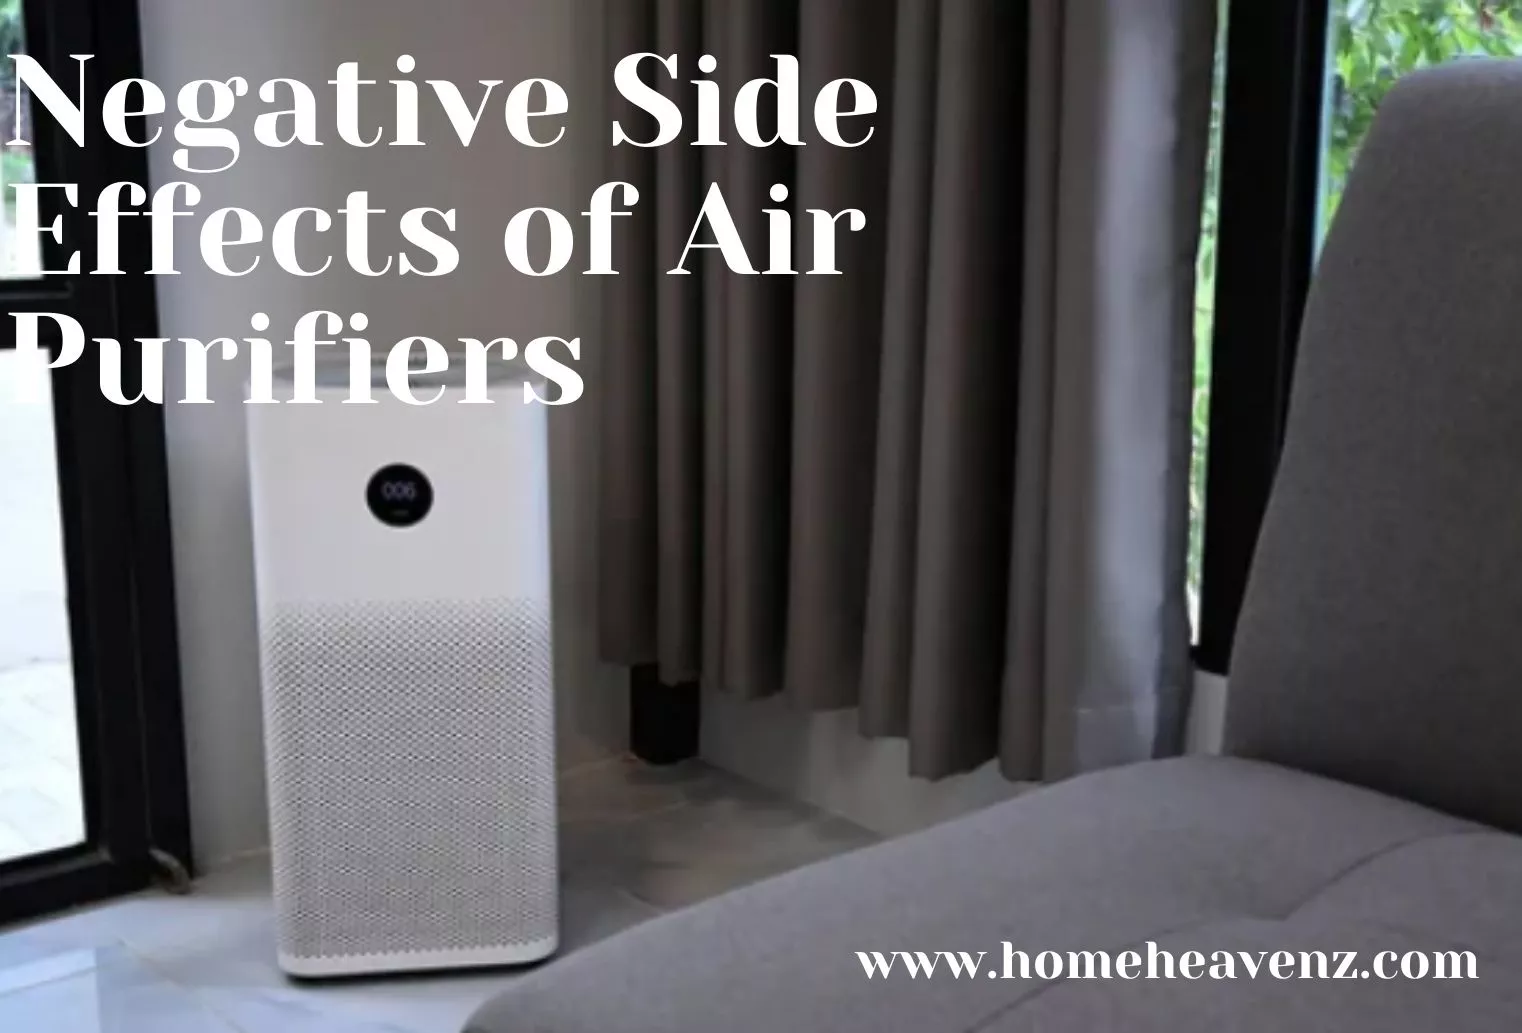 Negative Side Effects of Air Purifiers